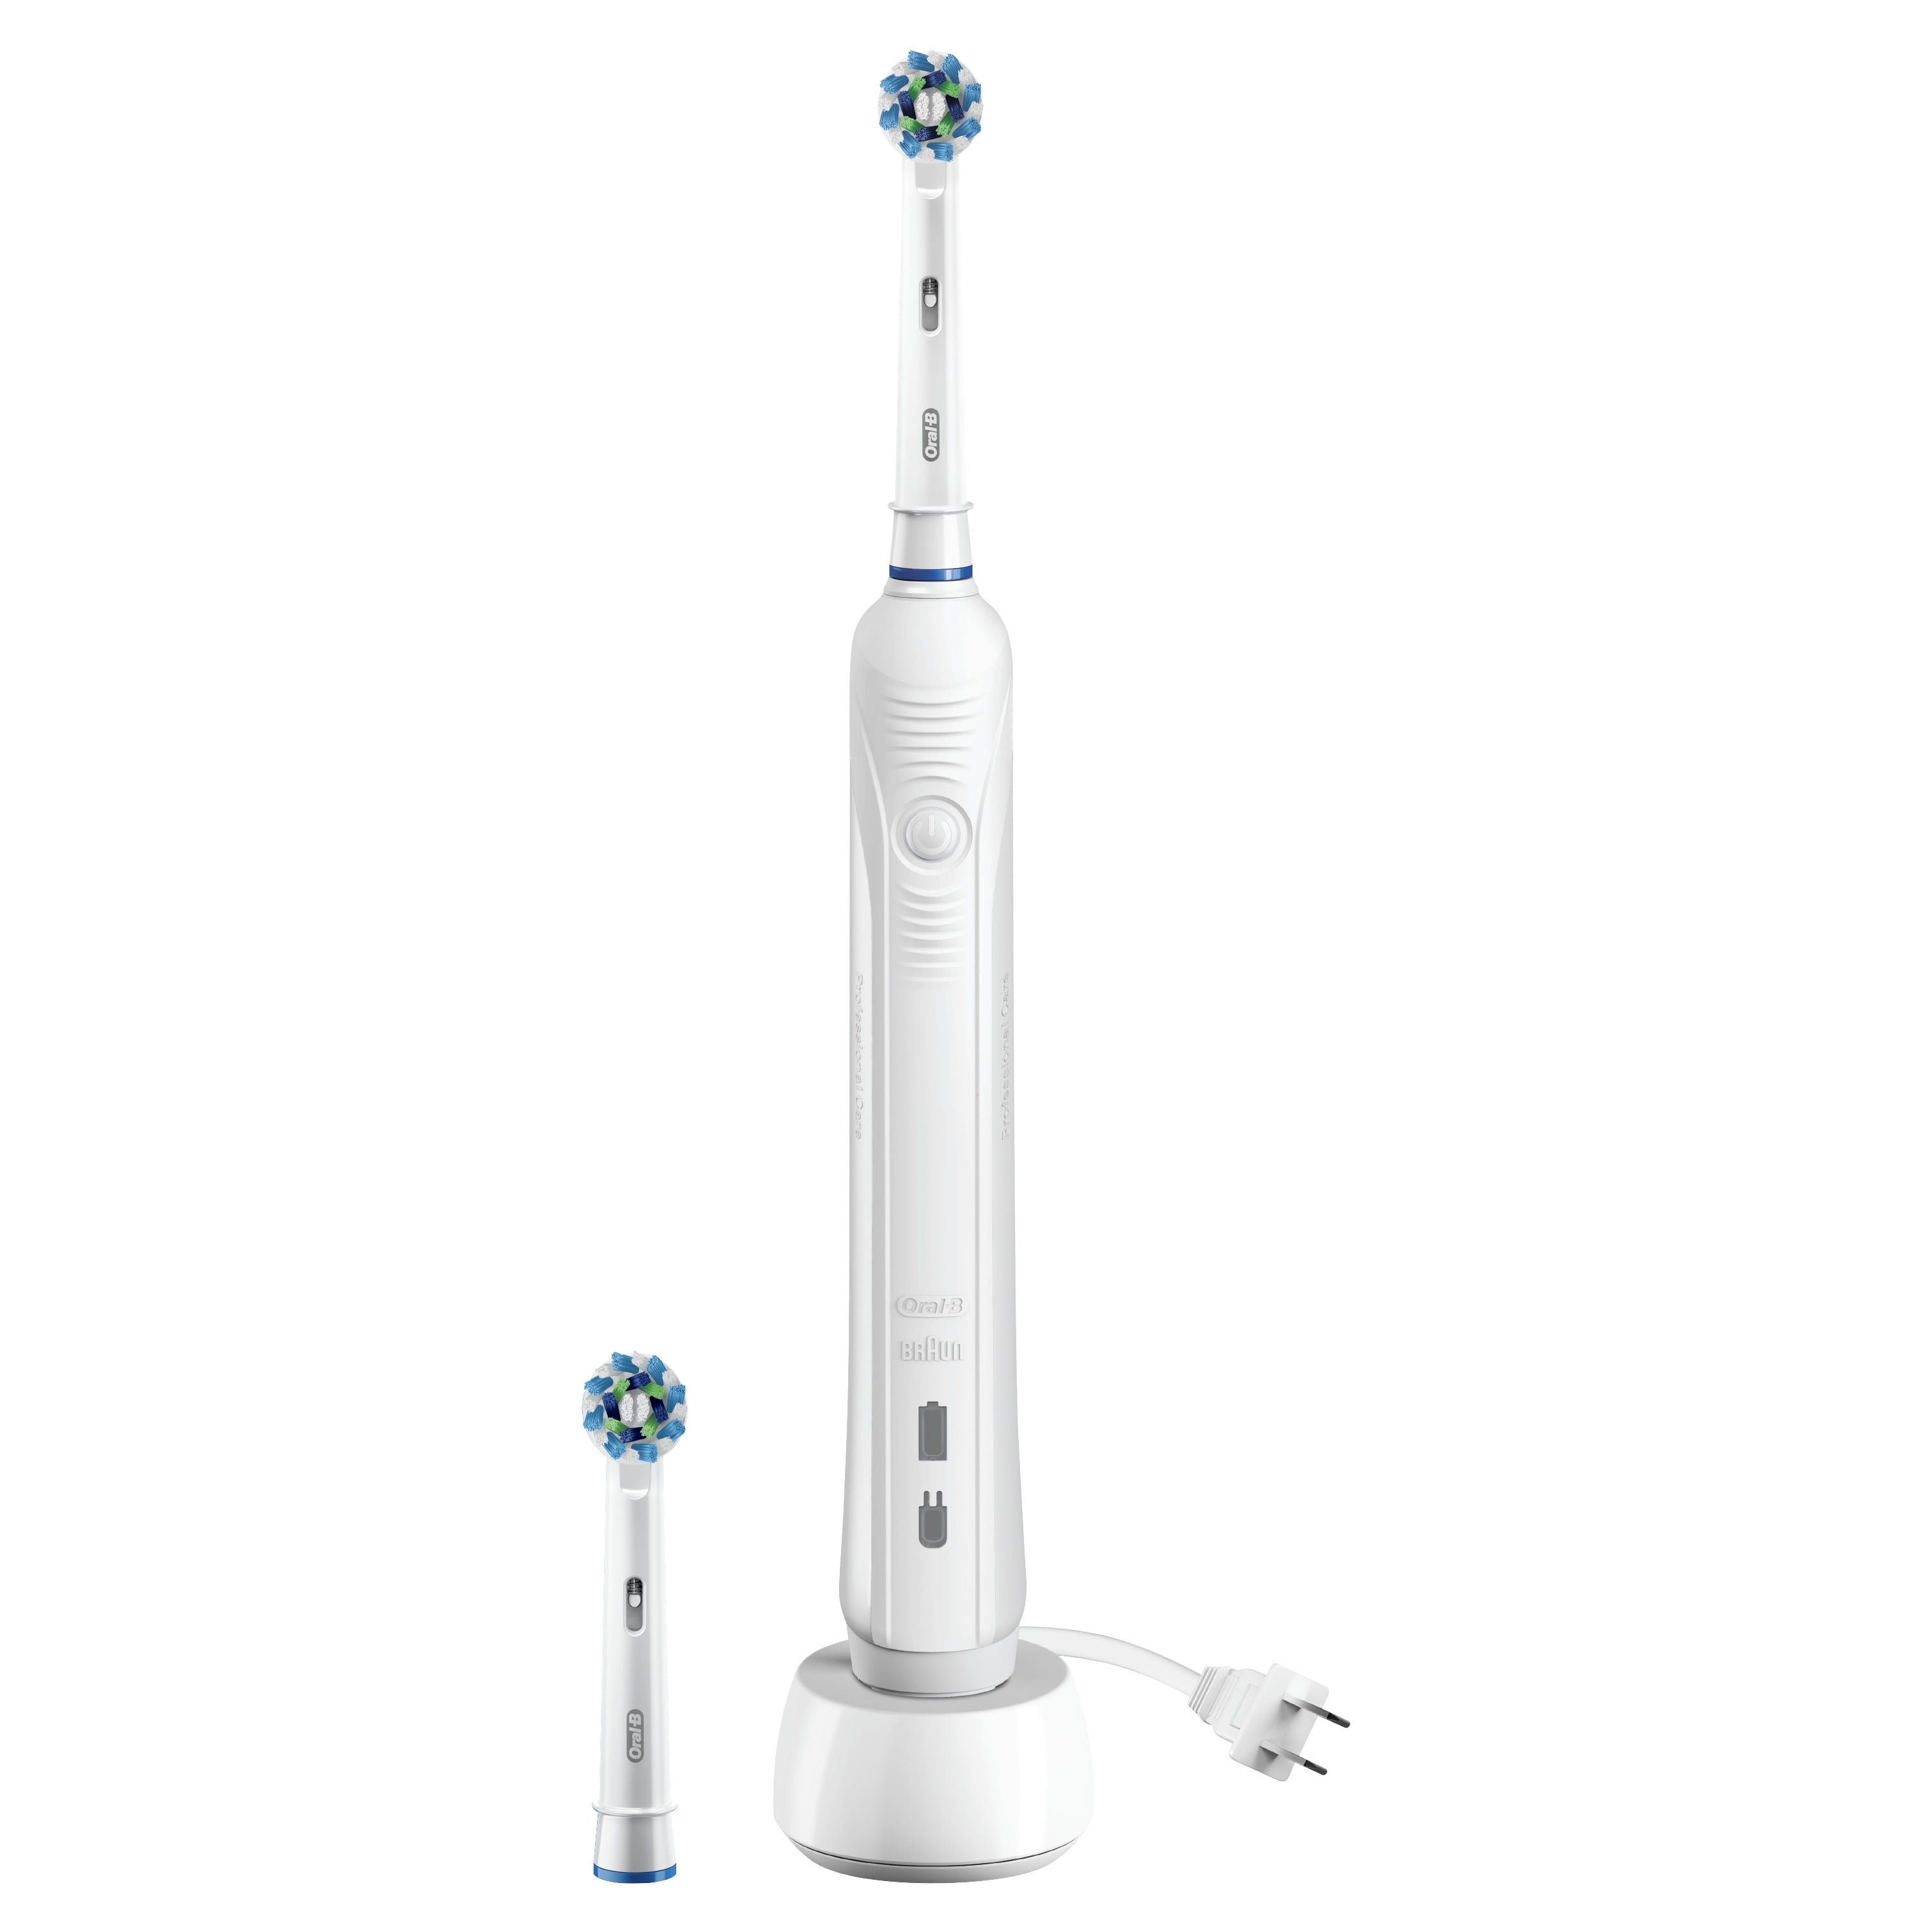 Buitensporig Harde ring Let op Oral-B Smart Series 5000 Electric Rechargeable Toothbrush Powered By Braun  By Oral-B | lagear.com.ar